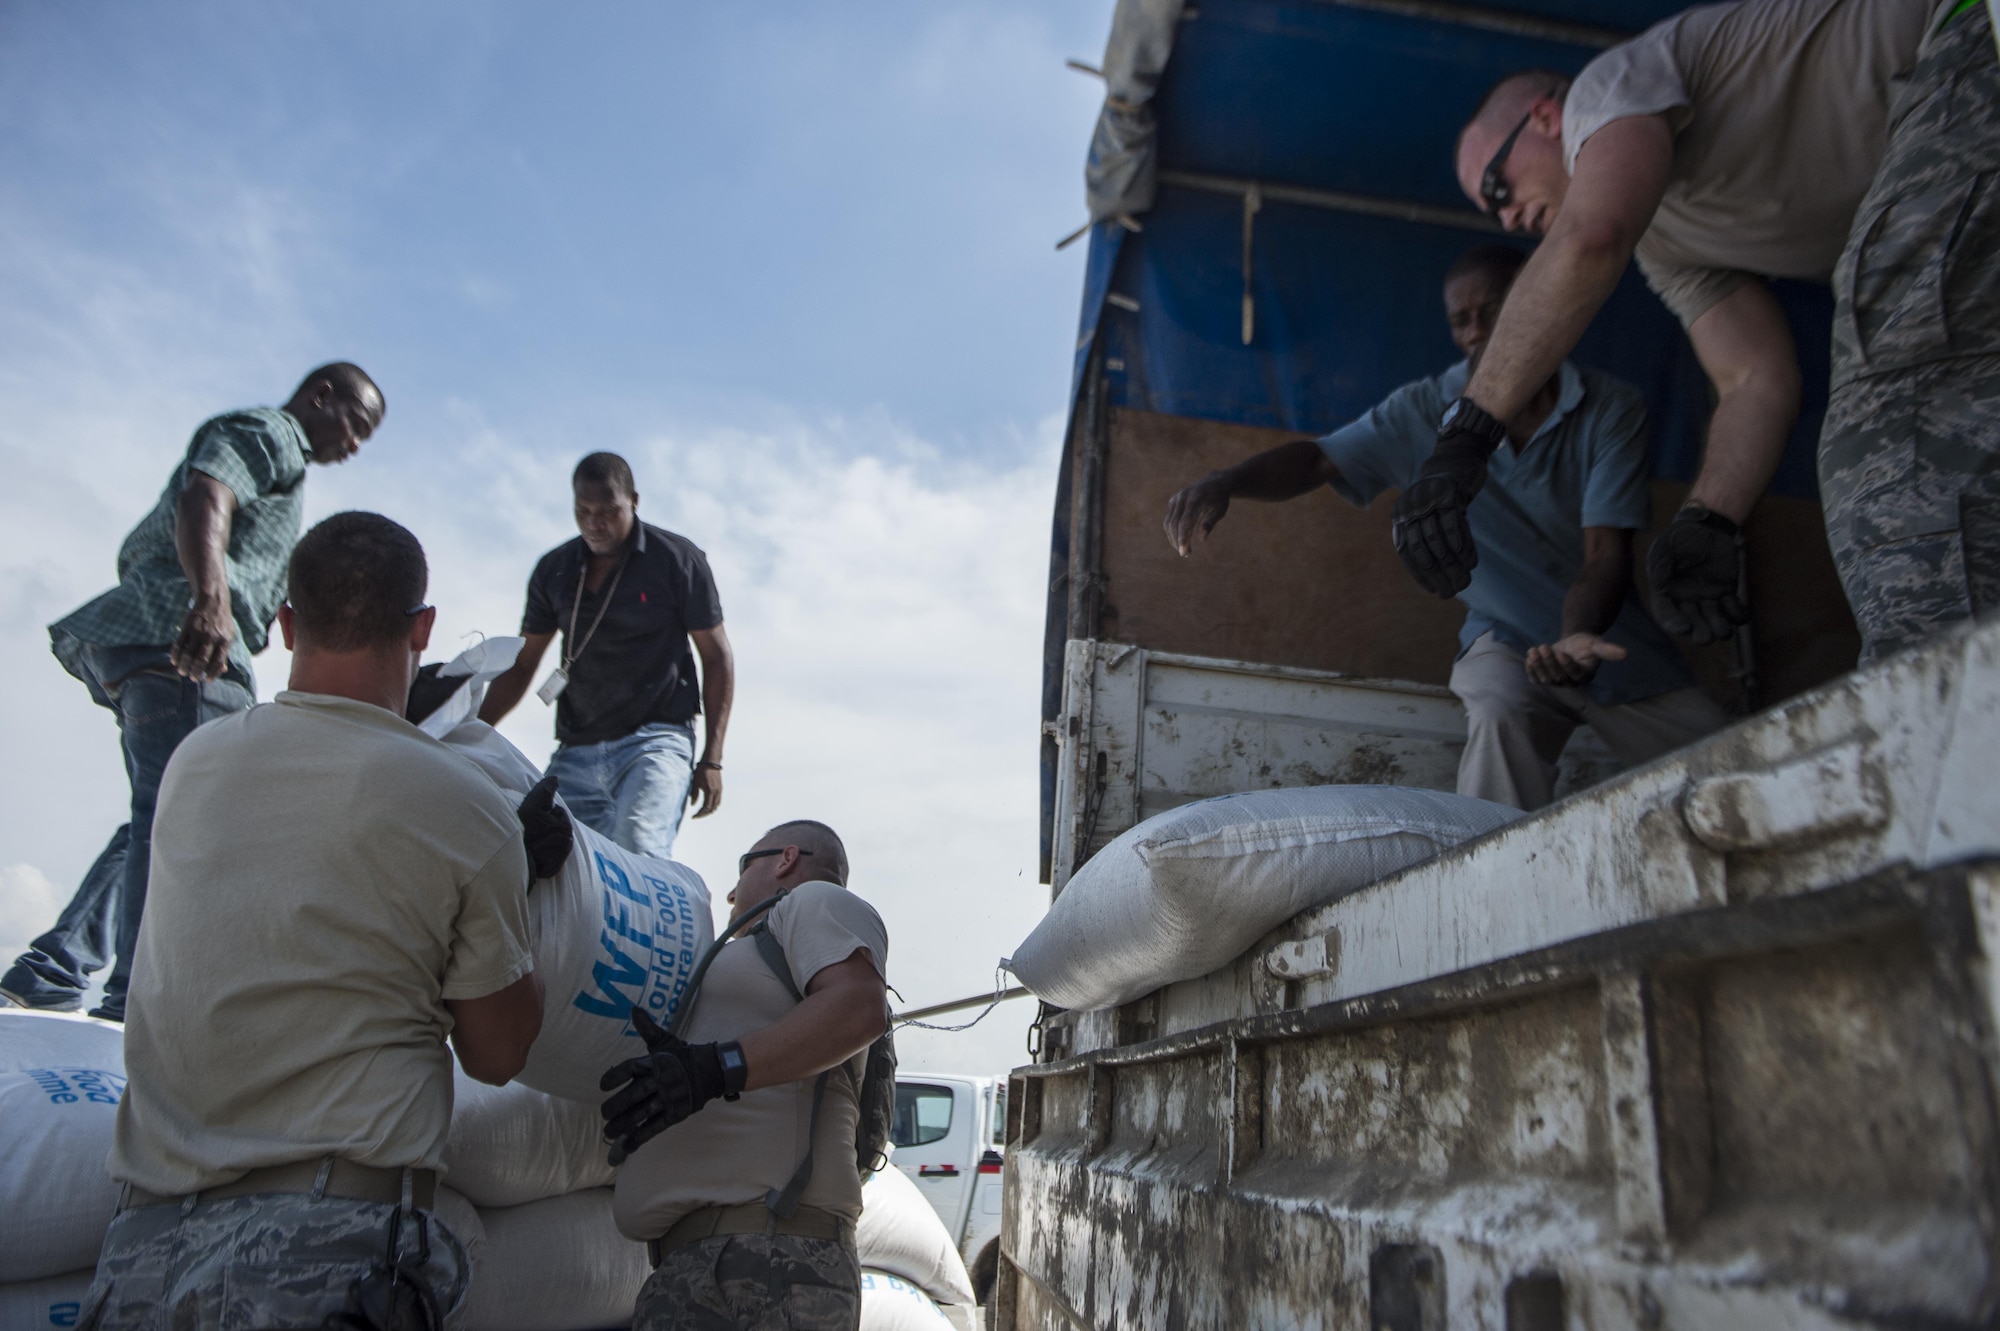 Airmen from the 621st Contingency Response Wing help unload rice from a World Food Program truck Oct. 9, 2016, in Port-Au-Prince, Haiti. The Airmen were working alongside Haitian citizens to provide relief after the nation was struck by Hurricane Matthew. (U.S. Air Force photo/Tech. Sgt. Russ Scalf)